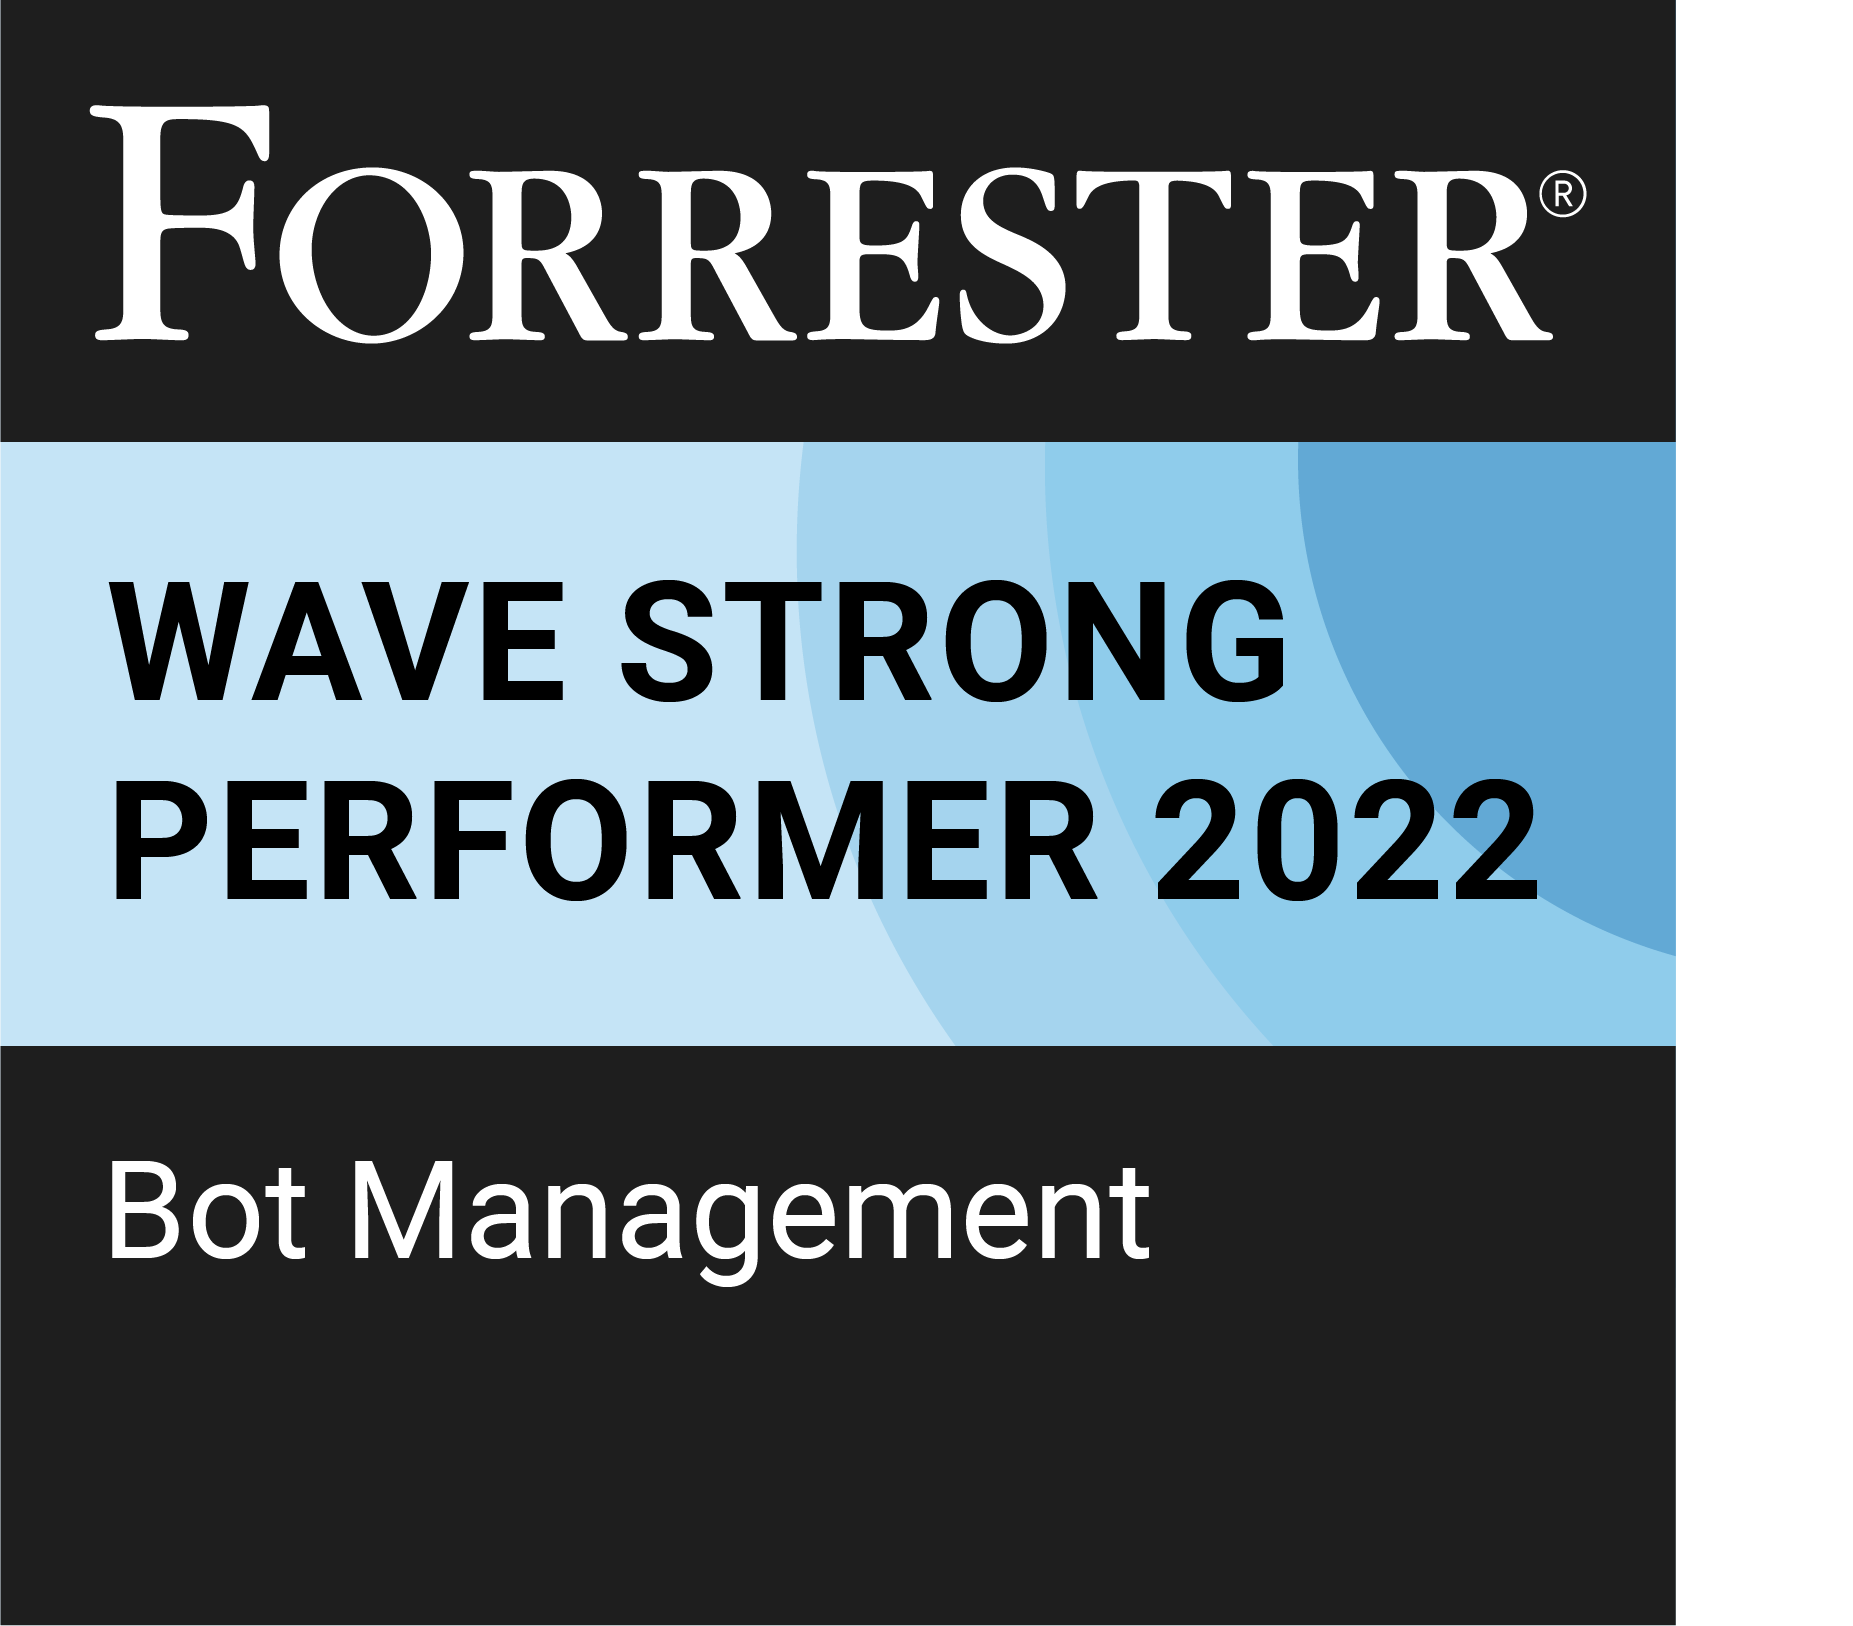 Forrester rated Netacea #1 for Bot detection